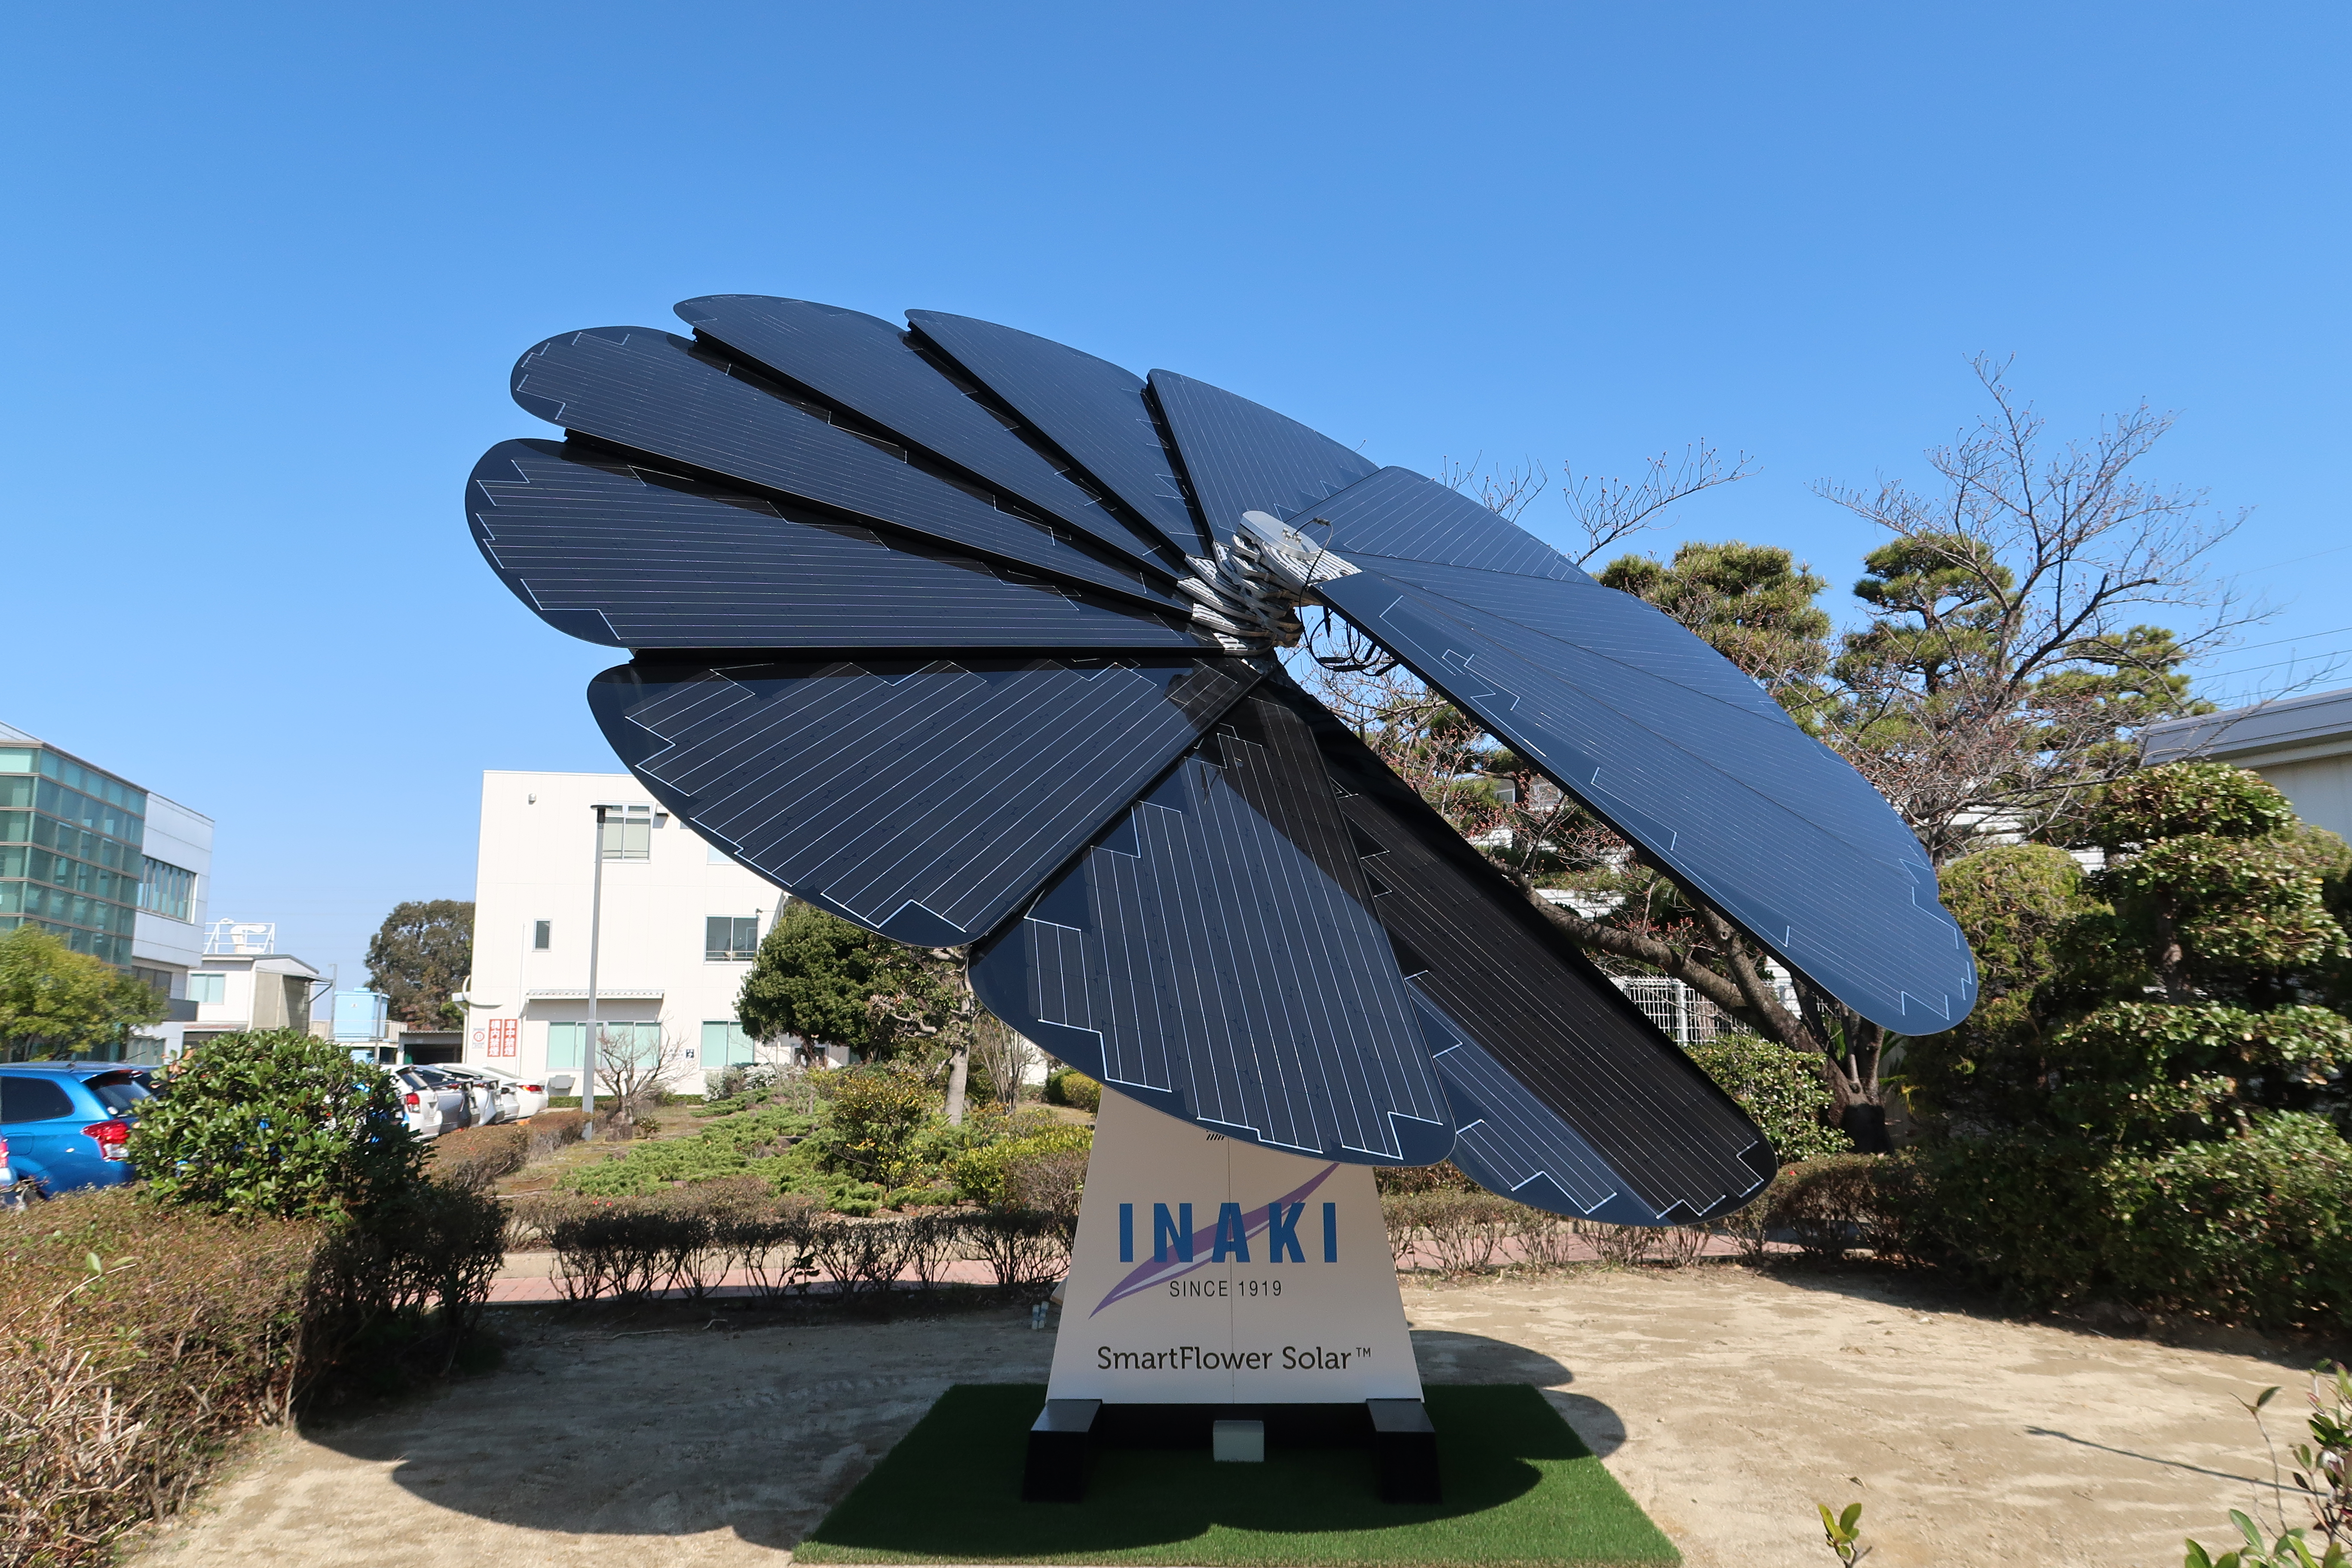 GomunoInaki Invests in Sustainable Development With Innovative SmartFlower  Solar Solution | Business Wire